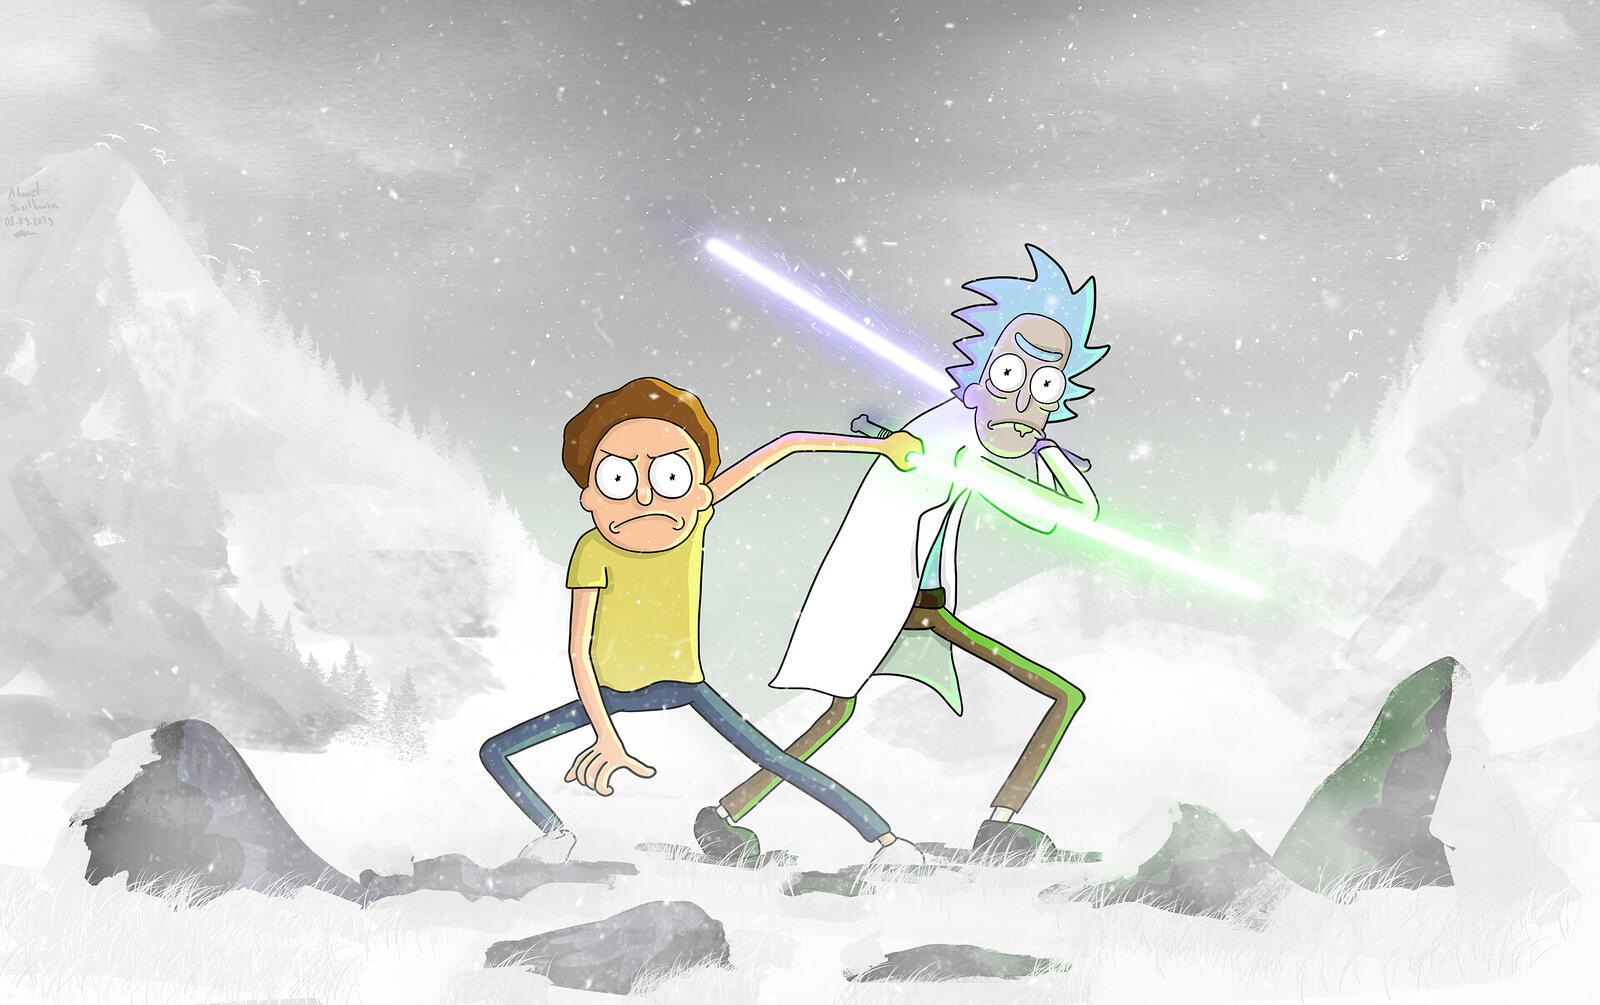 Wallpapers rick and morty TV show star wars on the desktop